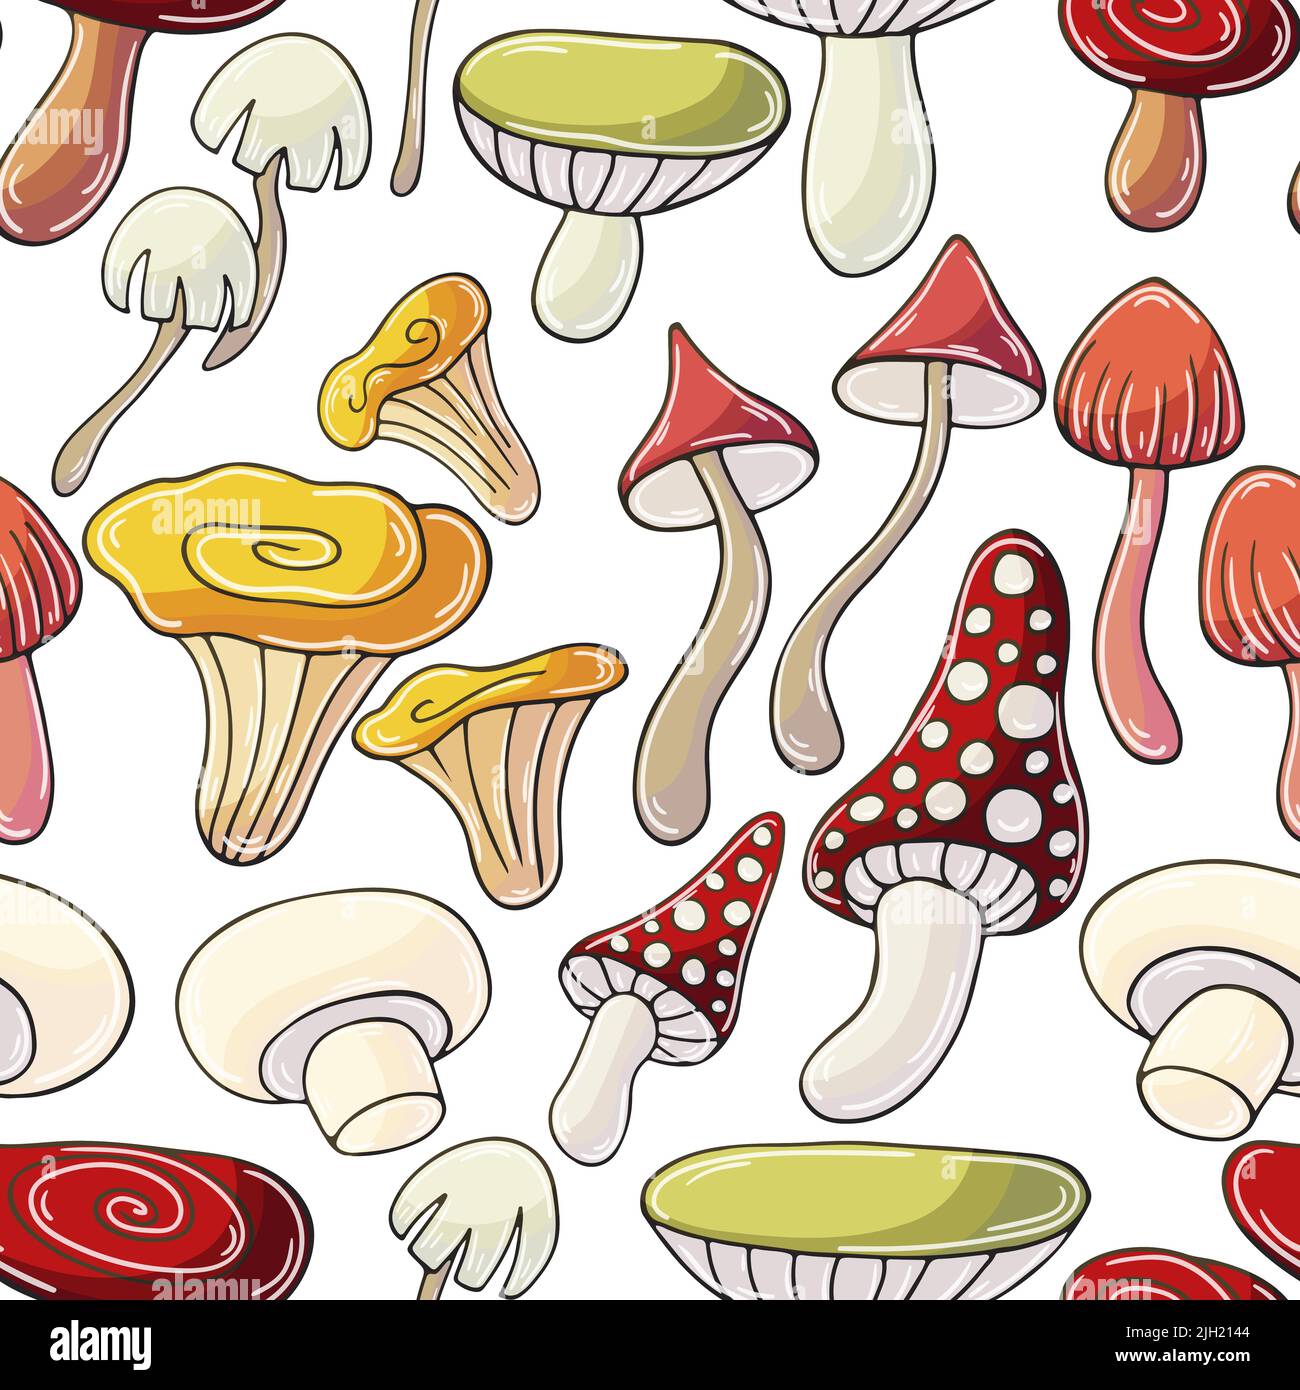 Mushroom autumn mood. Illustration in hand draw style. Seamless pattern with forest mushrooms. Can be used for fabric, packaging, wrapping and etc Stock Vector